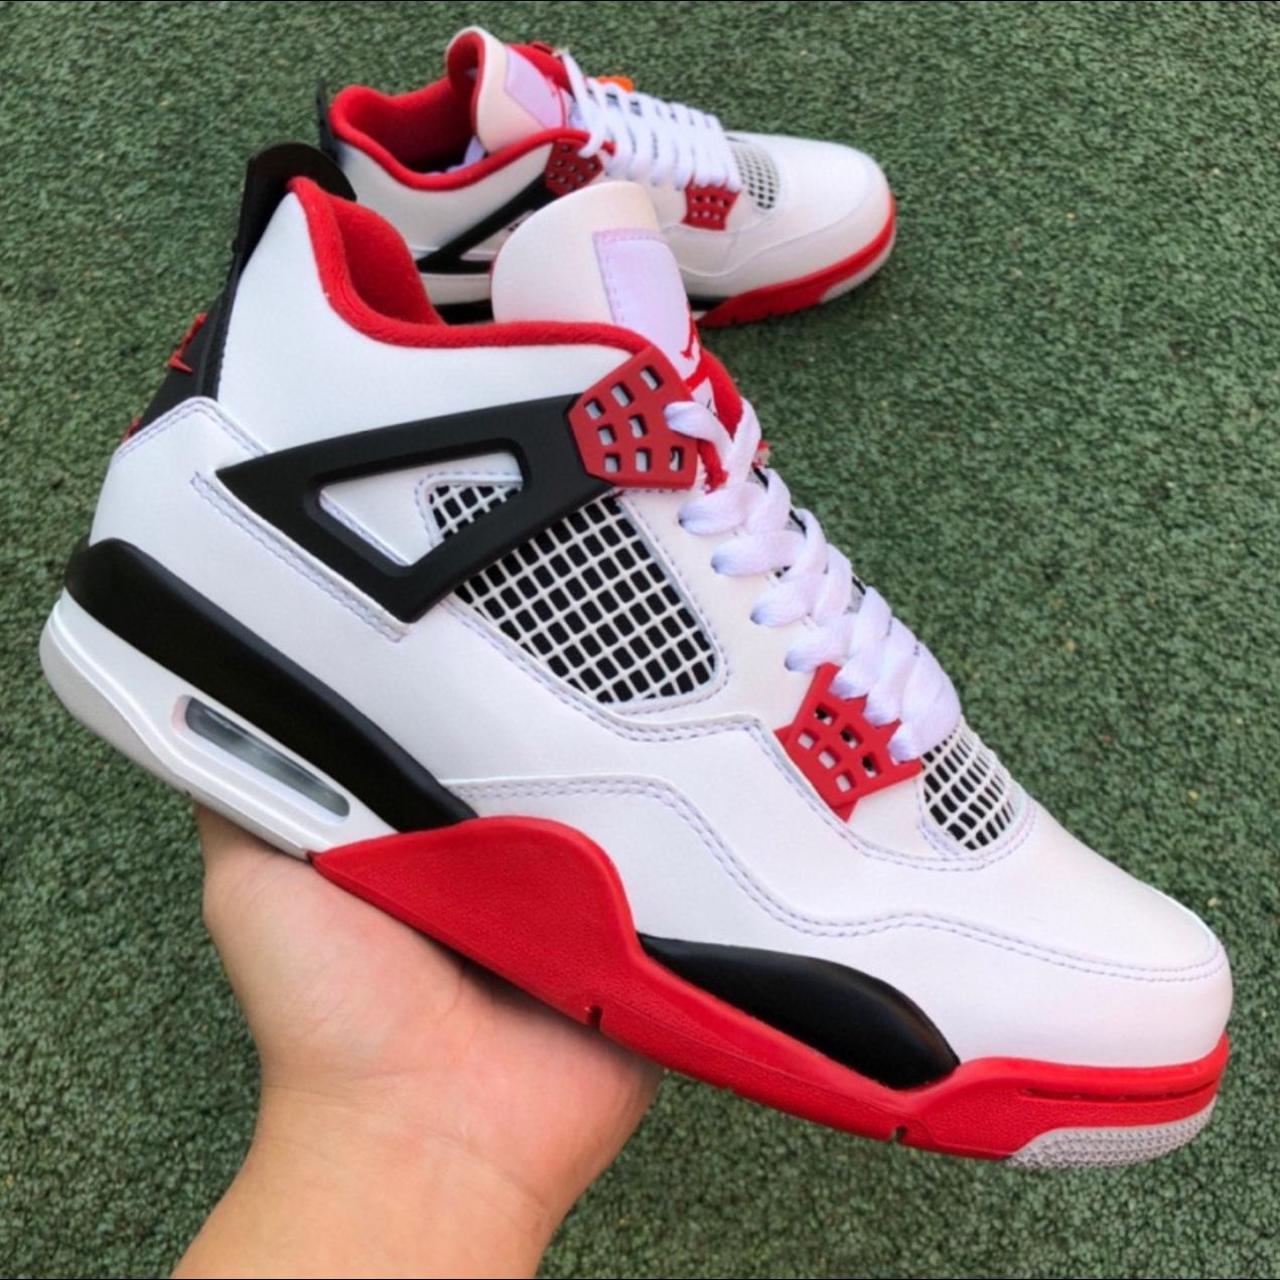 White red and black 4s 10.5 - Depop